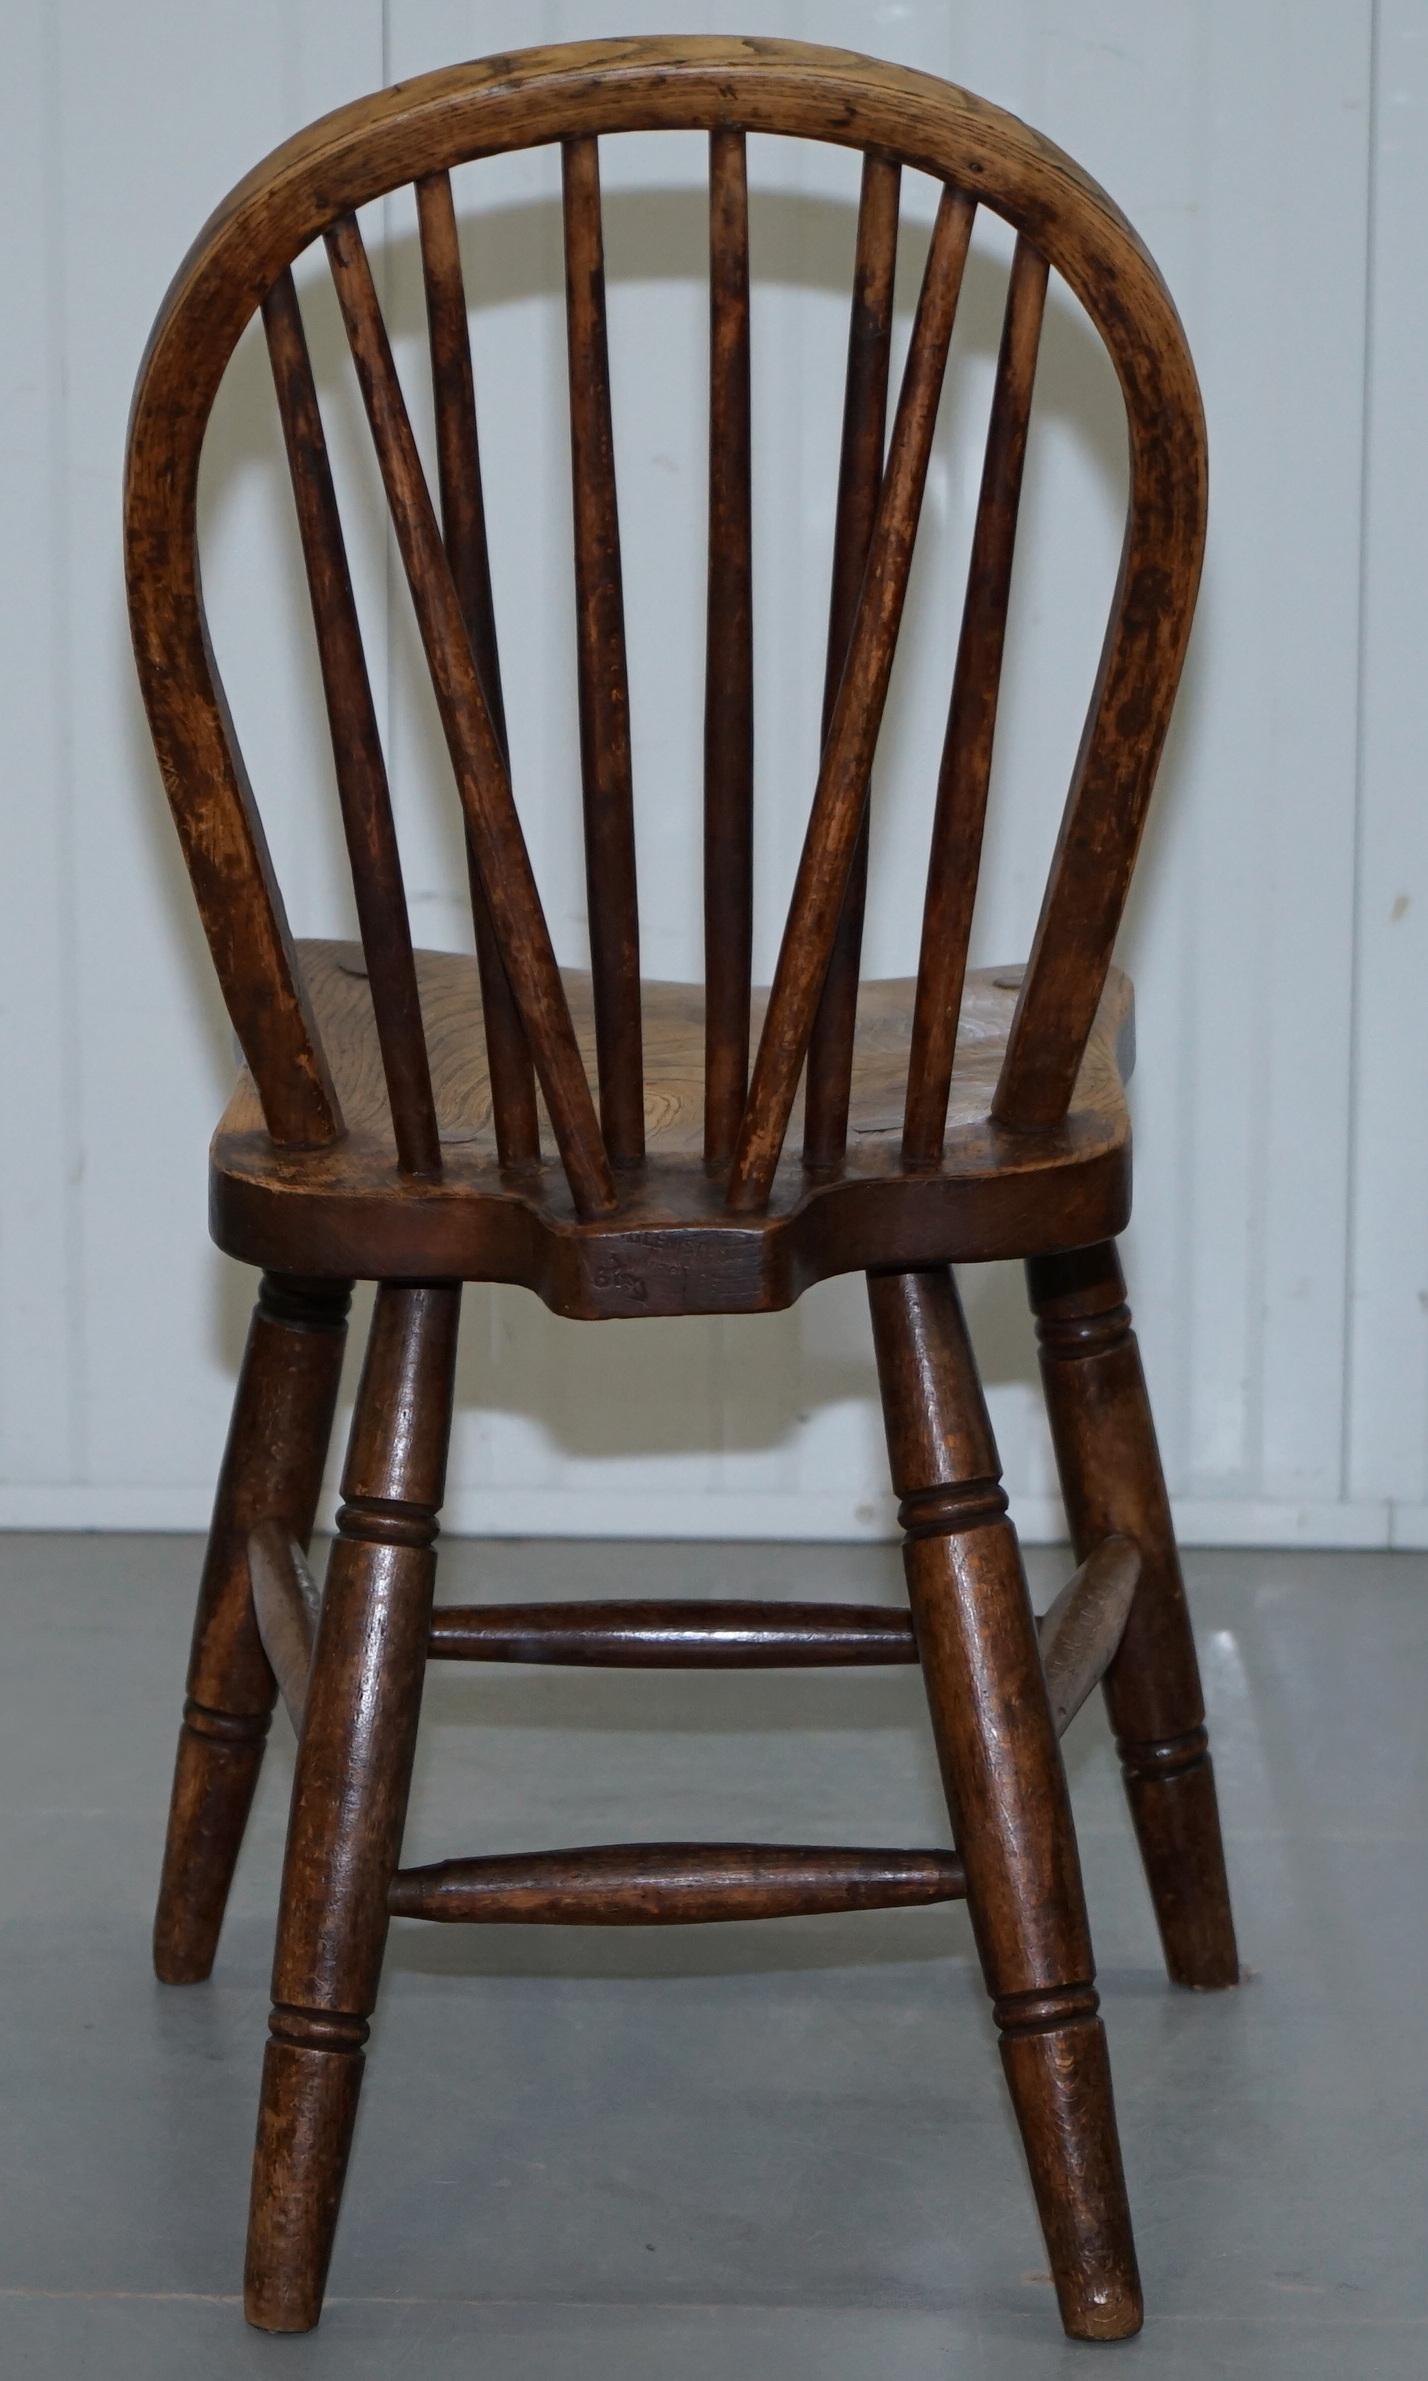 Rare Pair of Fully Stamped Victorian 1840 Hoop Back Windsor Chairs High Wycombe 2